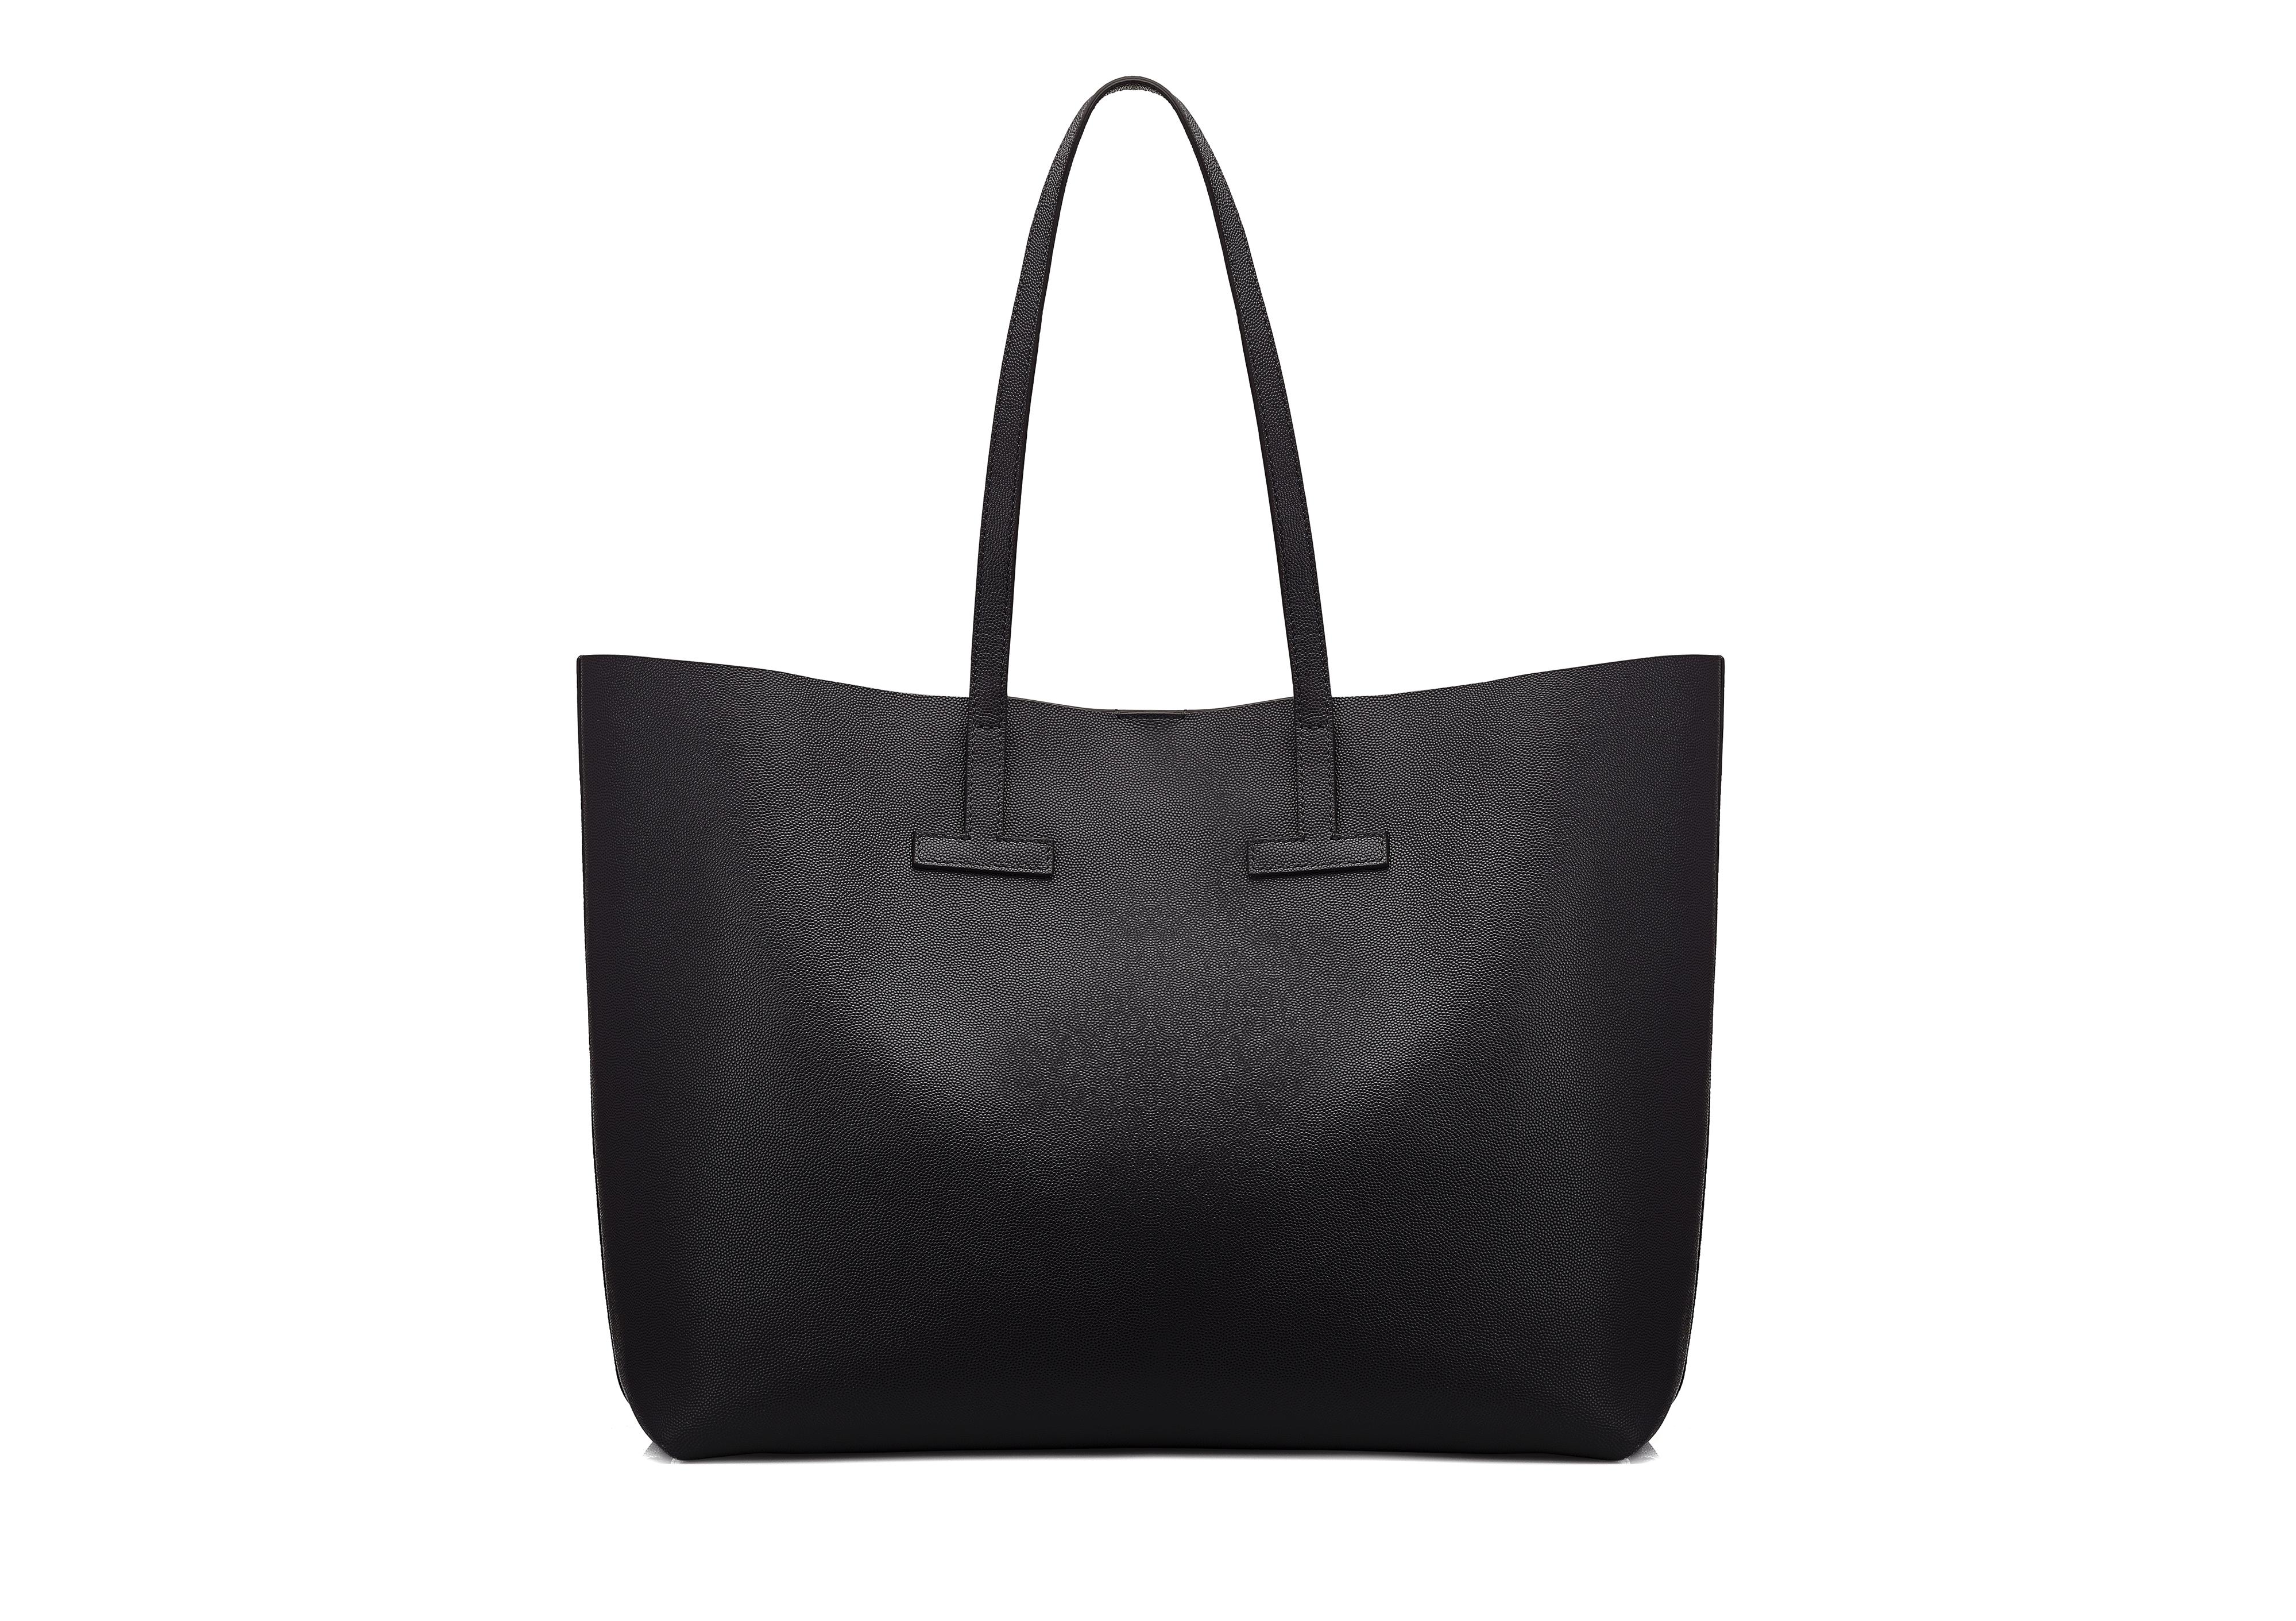 2 Stores In Stock: TOM FORD T Tote Leather Shopper, Black | ModeSens